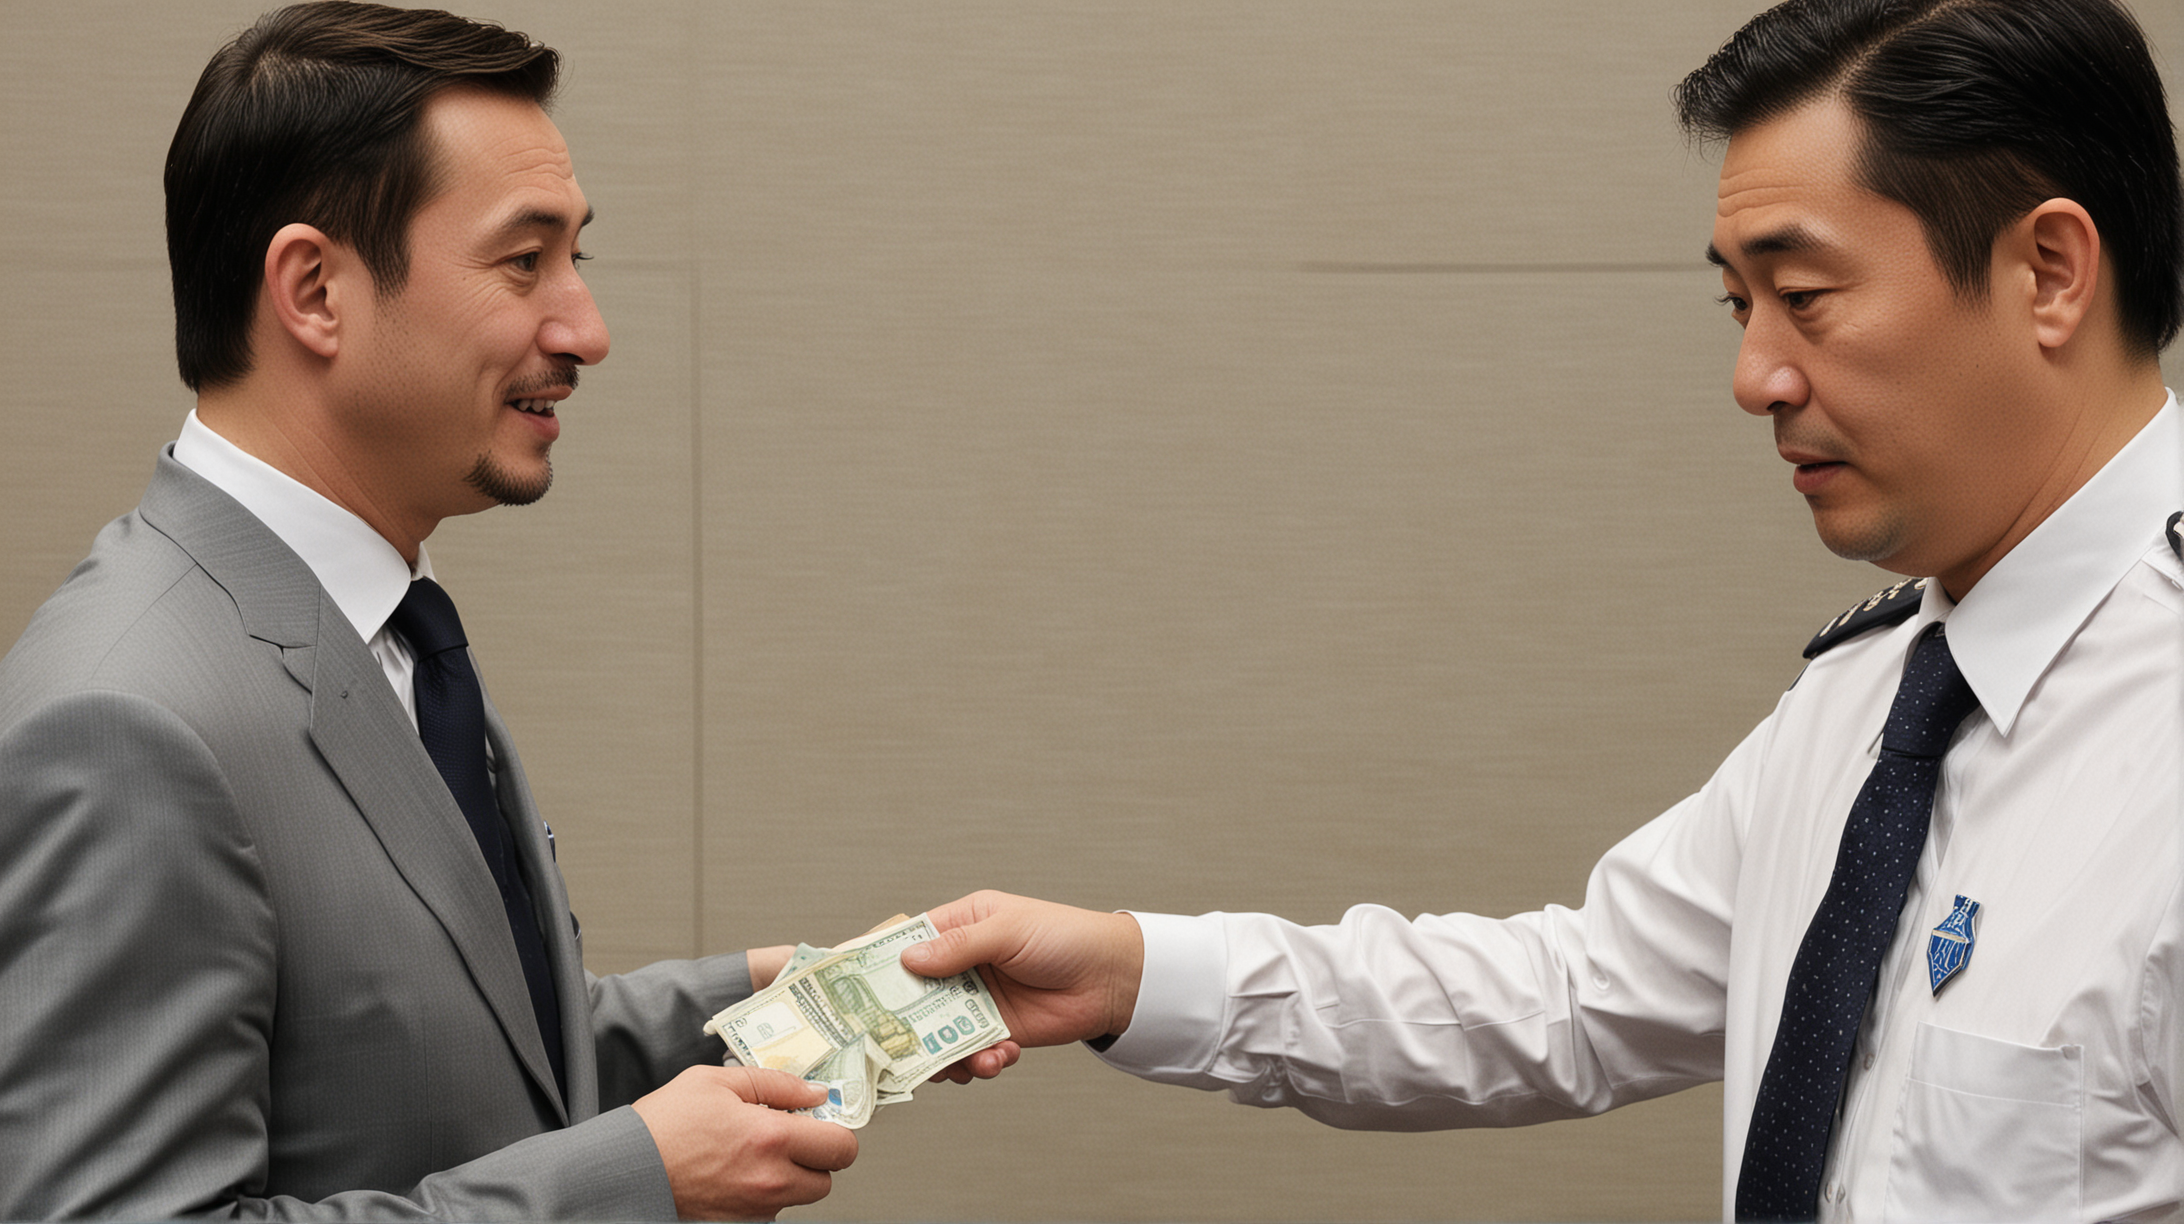 A EUROPEAN  INTERPOL SECURITY OFFICER  RECEIVING SOME CASH FROM A CHINESE BUSINESSMAN